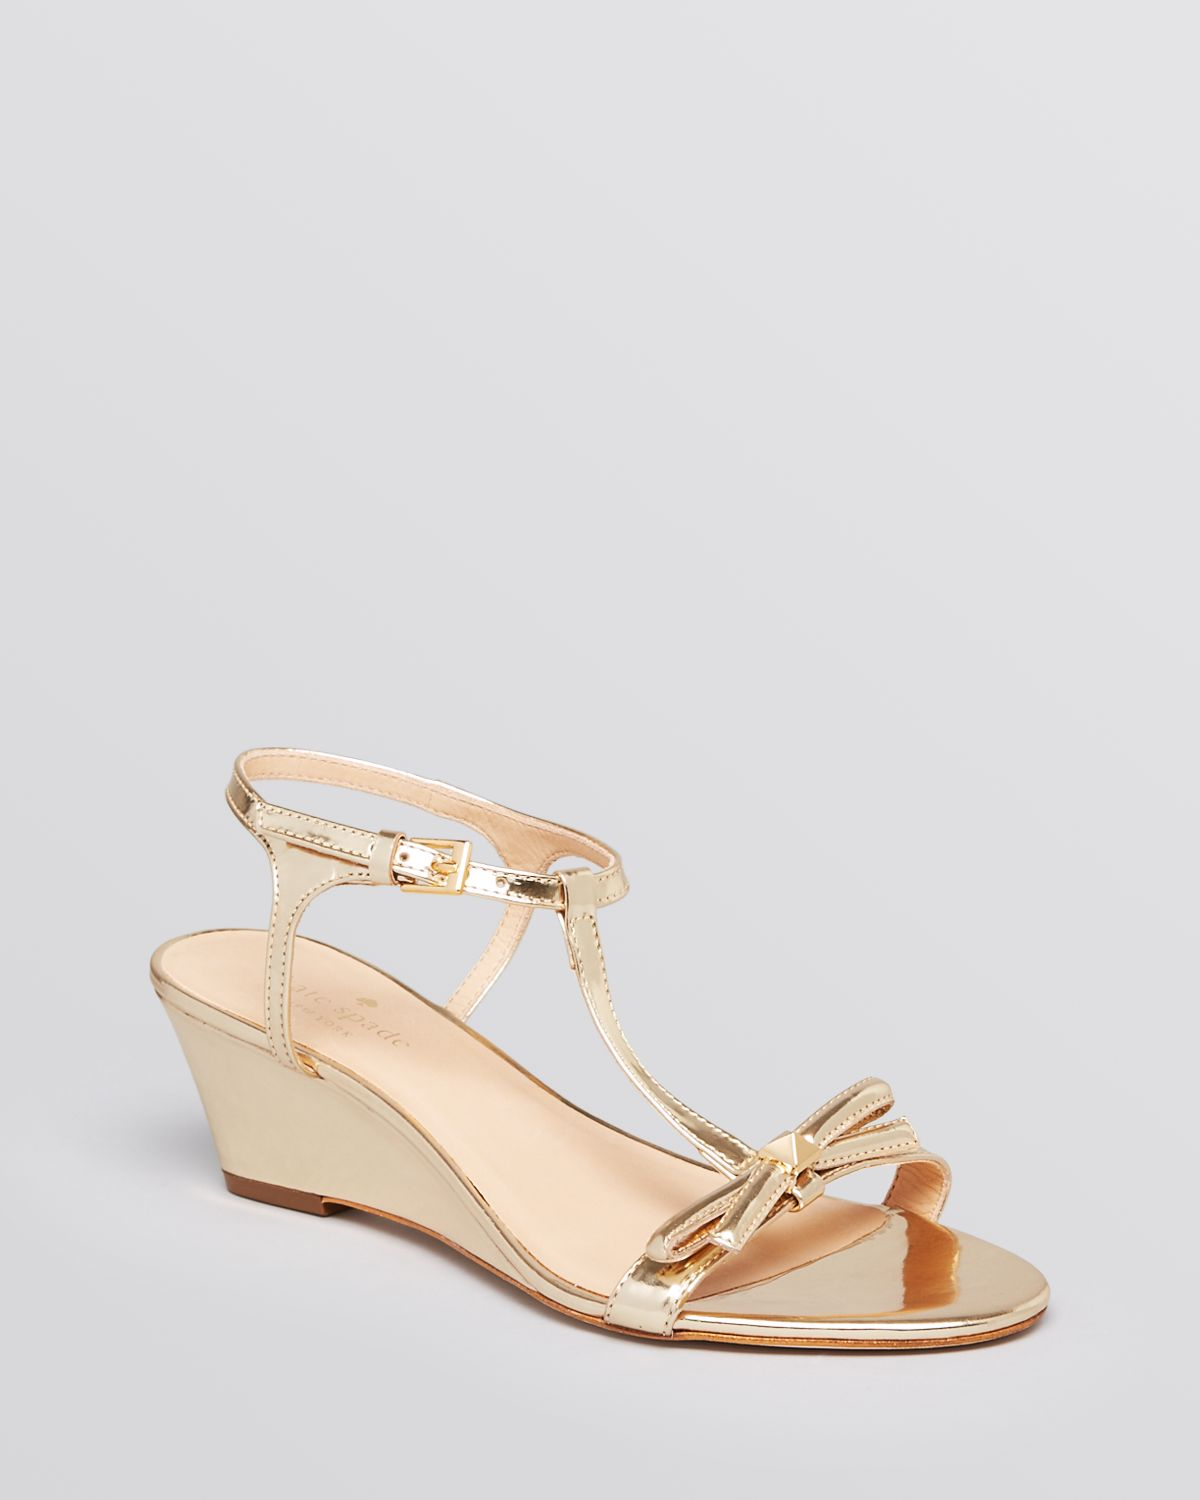 Lyst - Kate Spade New York Wedge Sandals Donna T Strap in Metallic